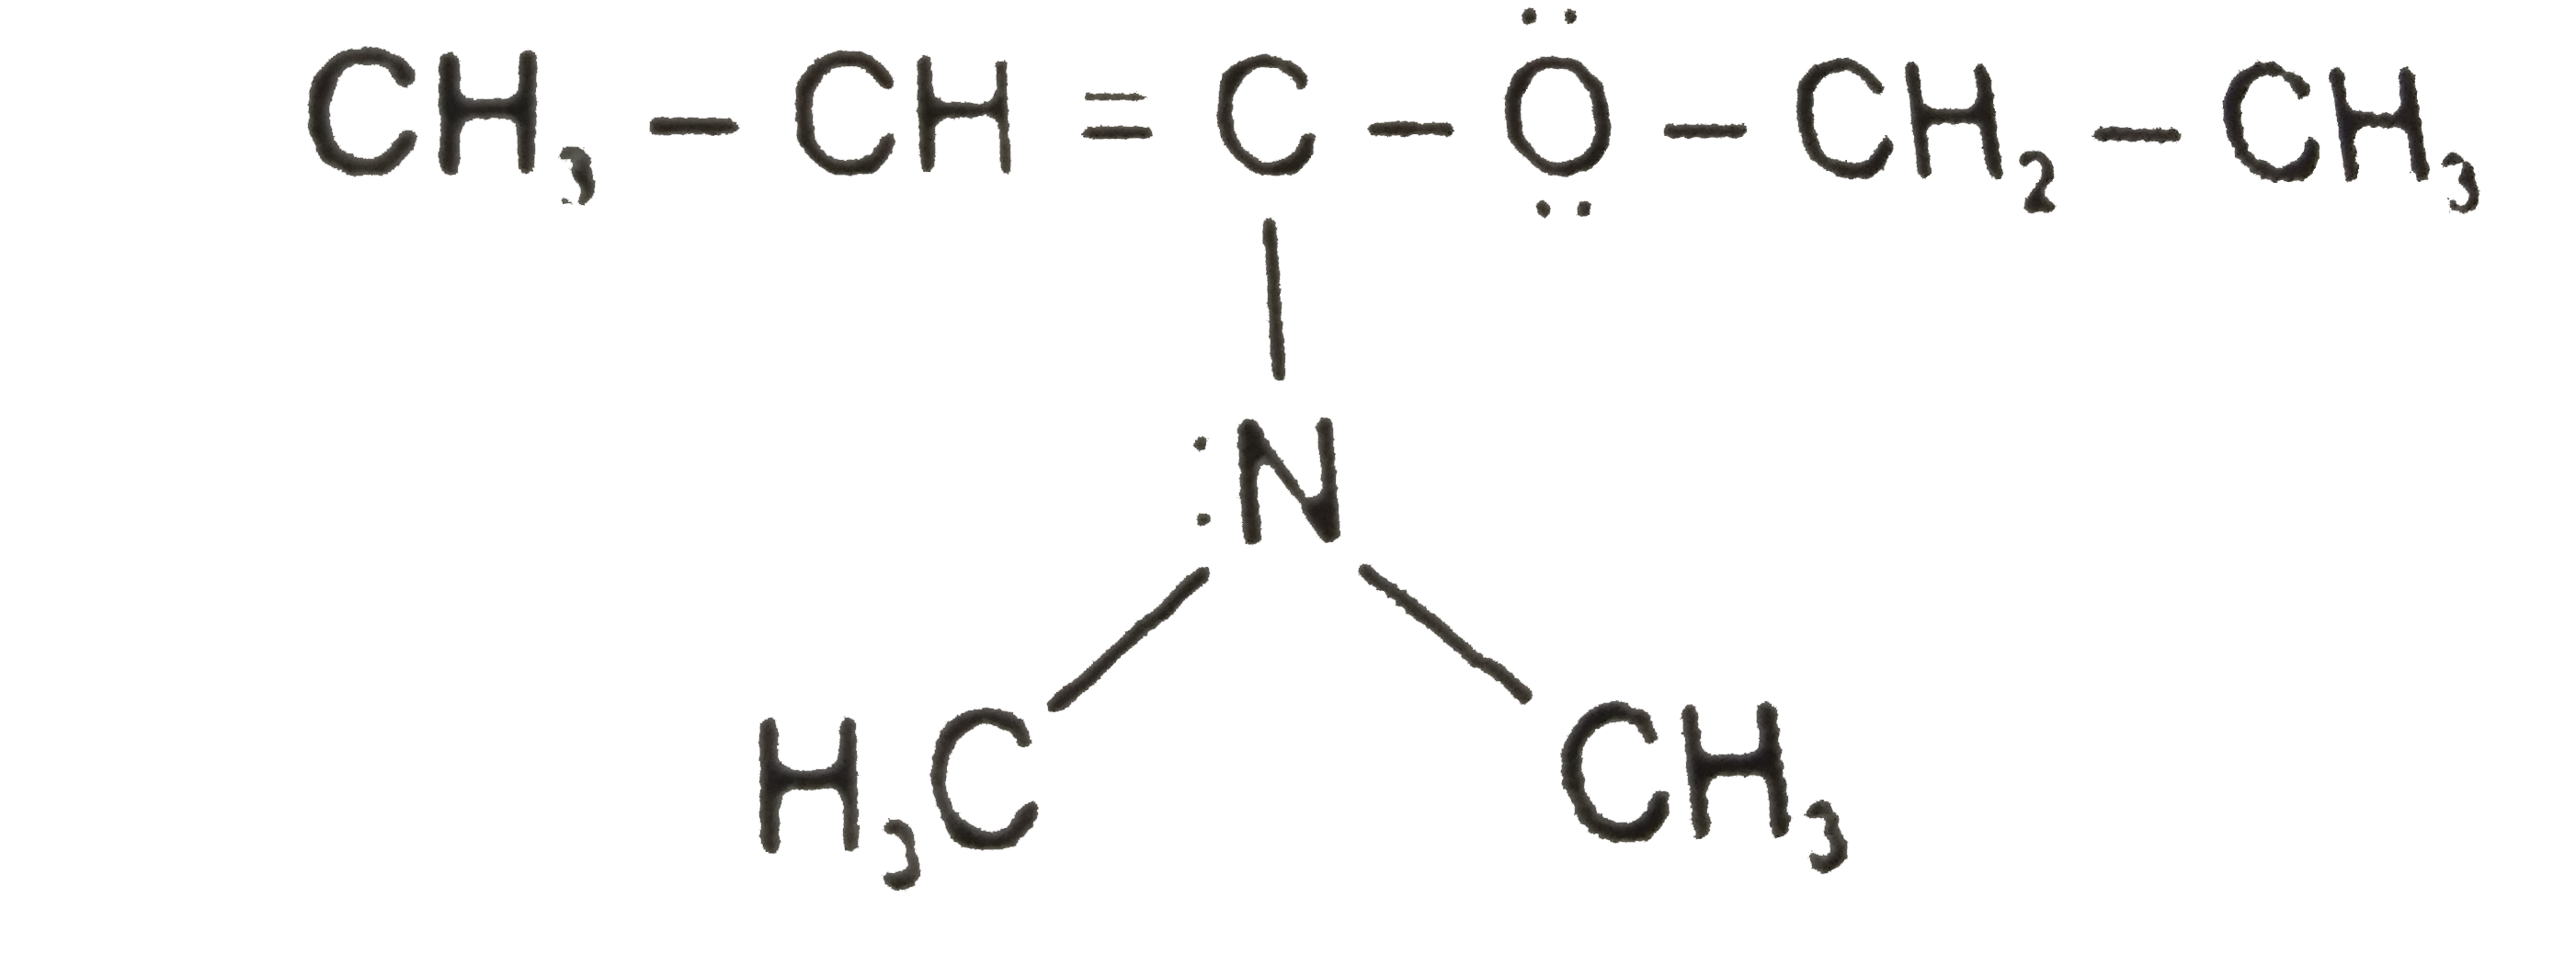 The acceptable resonating structure(s) of the following molecule is/are :